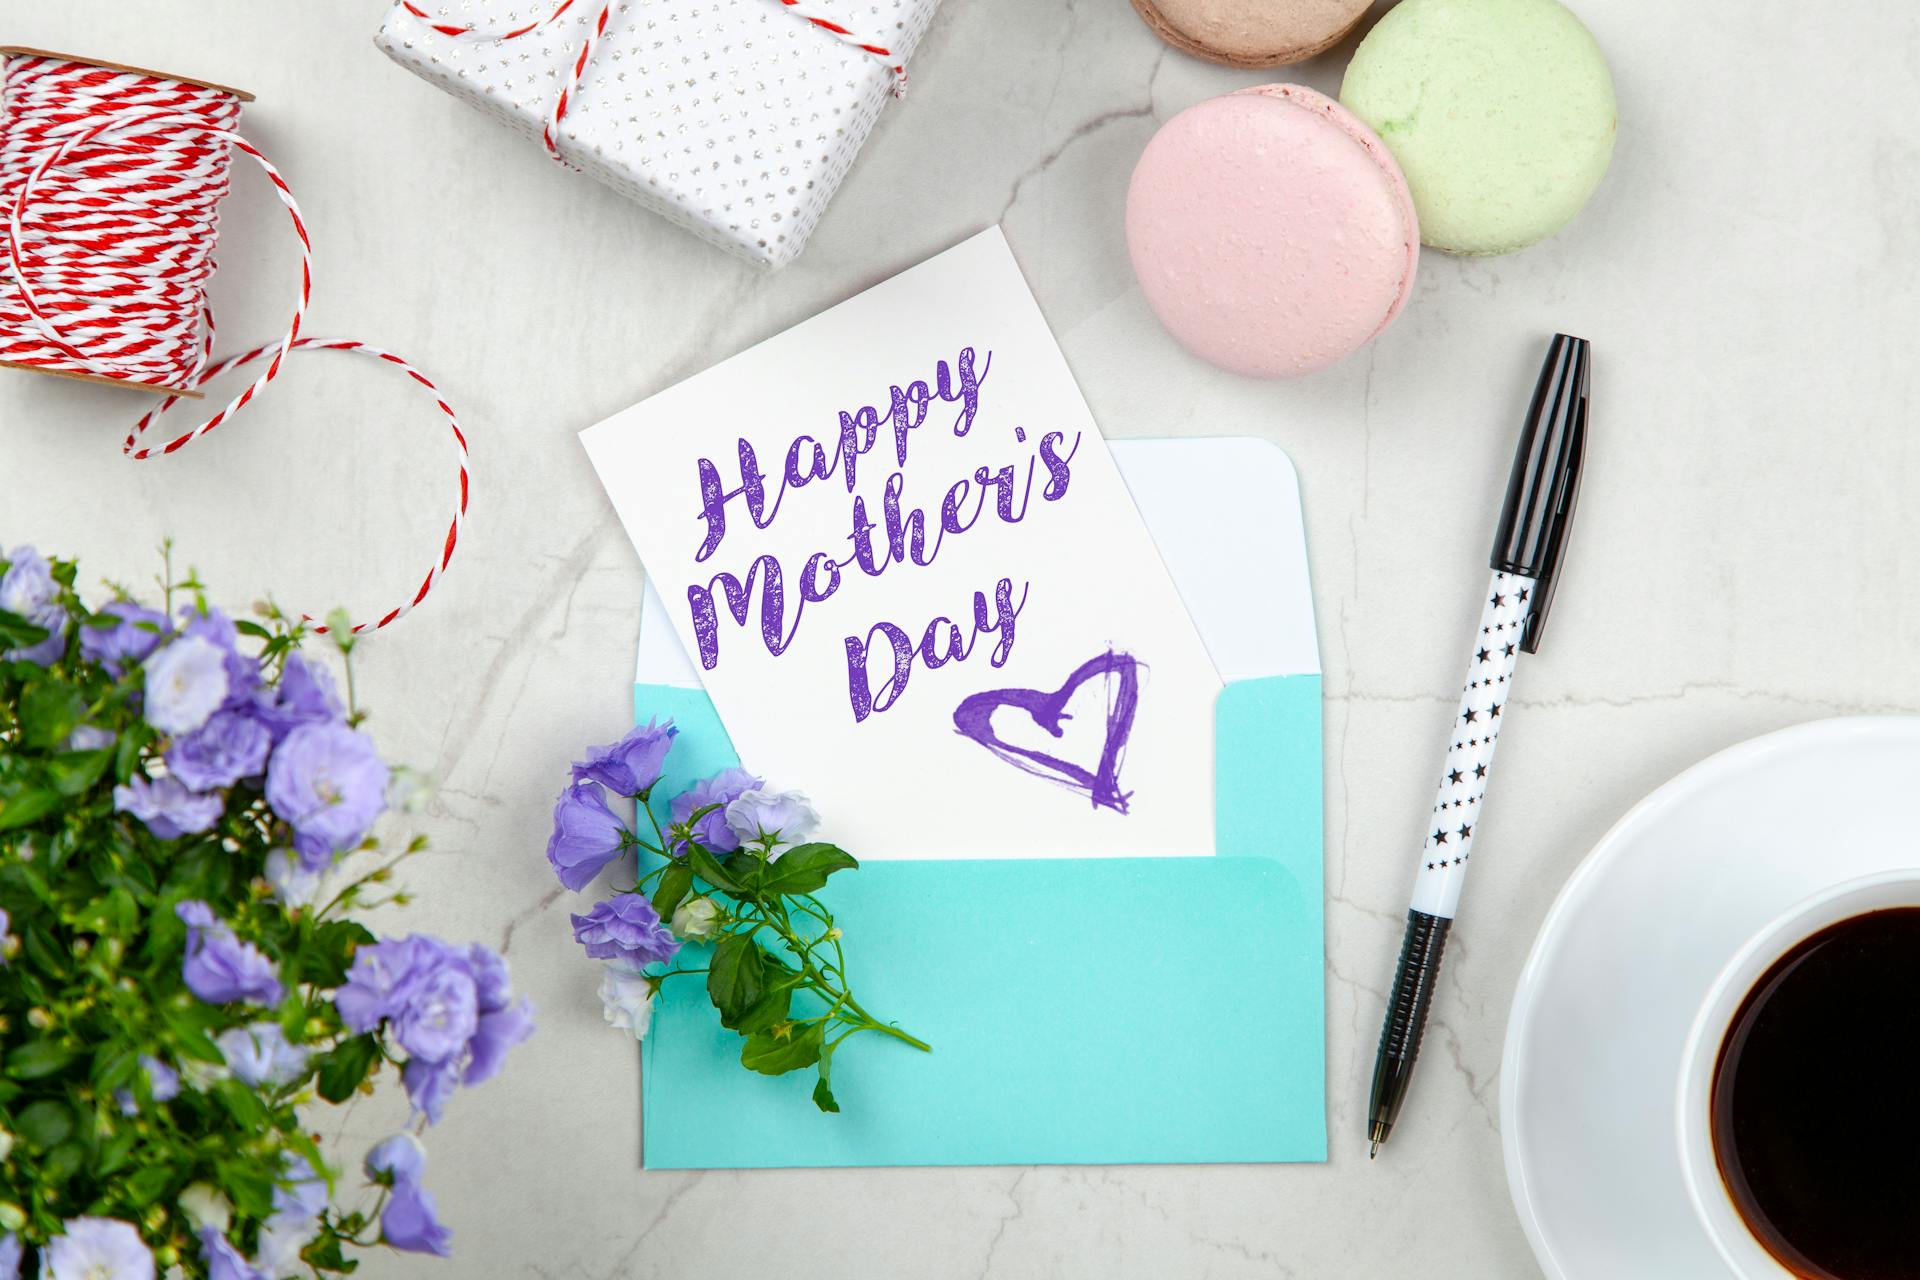 10 Lovely Mother’s Day Gifts That Say ‘I Love You’ Without Words